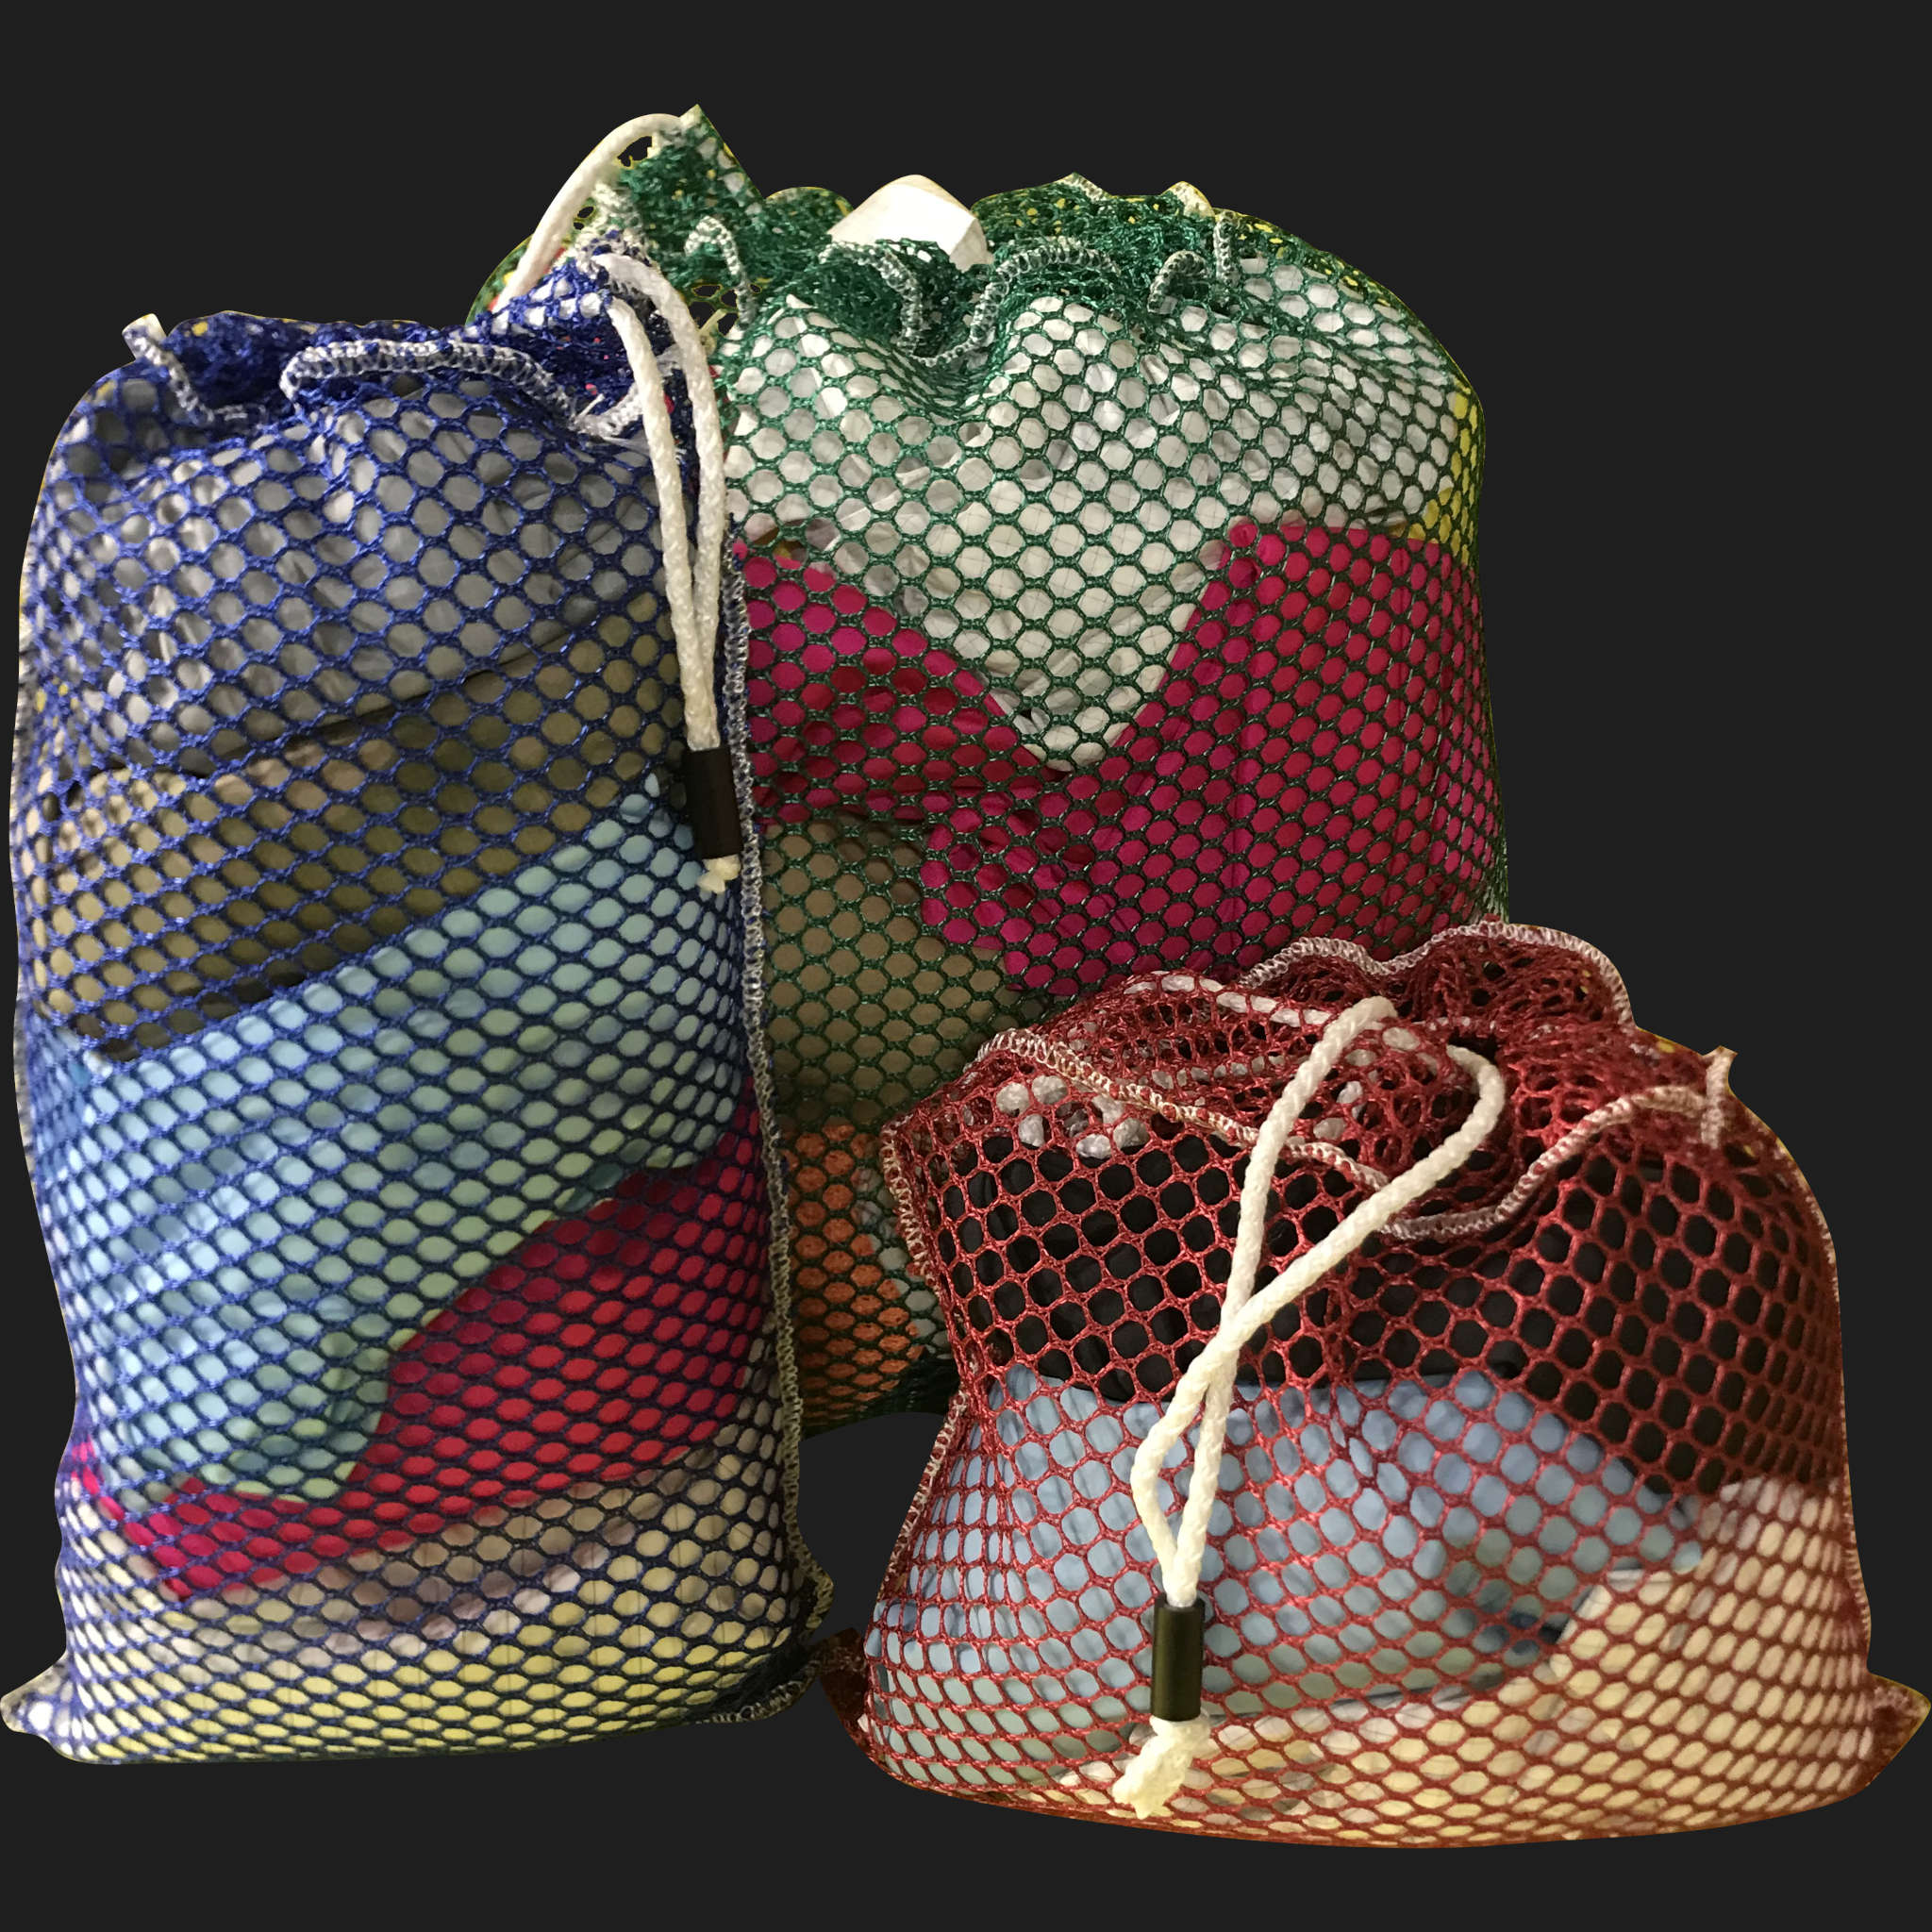 18" x 38" Customized Mesh-Net-Laundry Bags Heavy Duty with Cord and barrellock closure